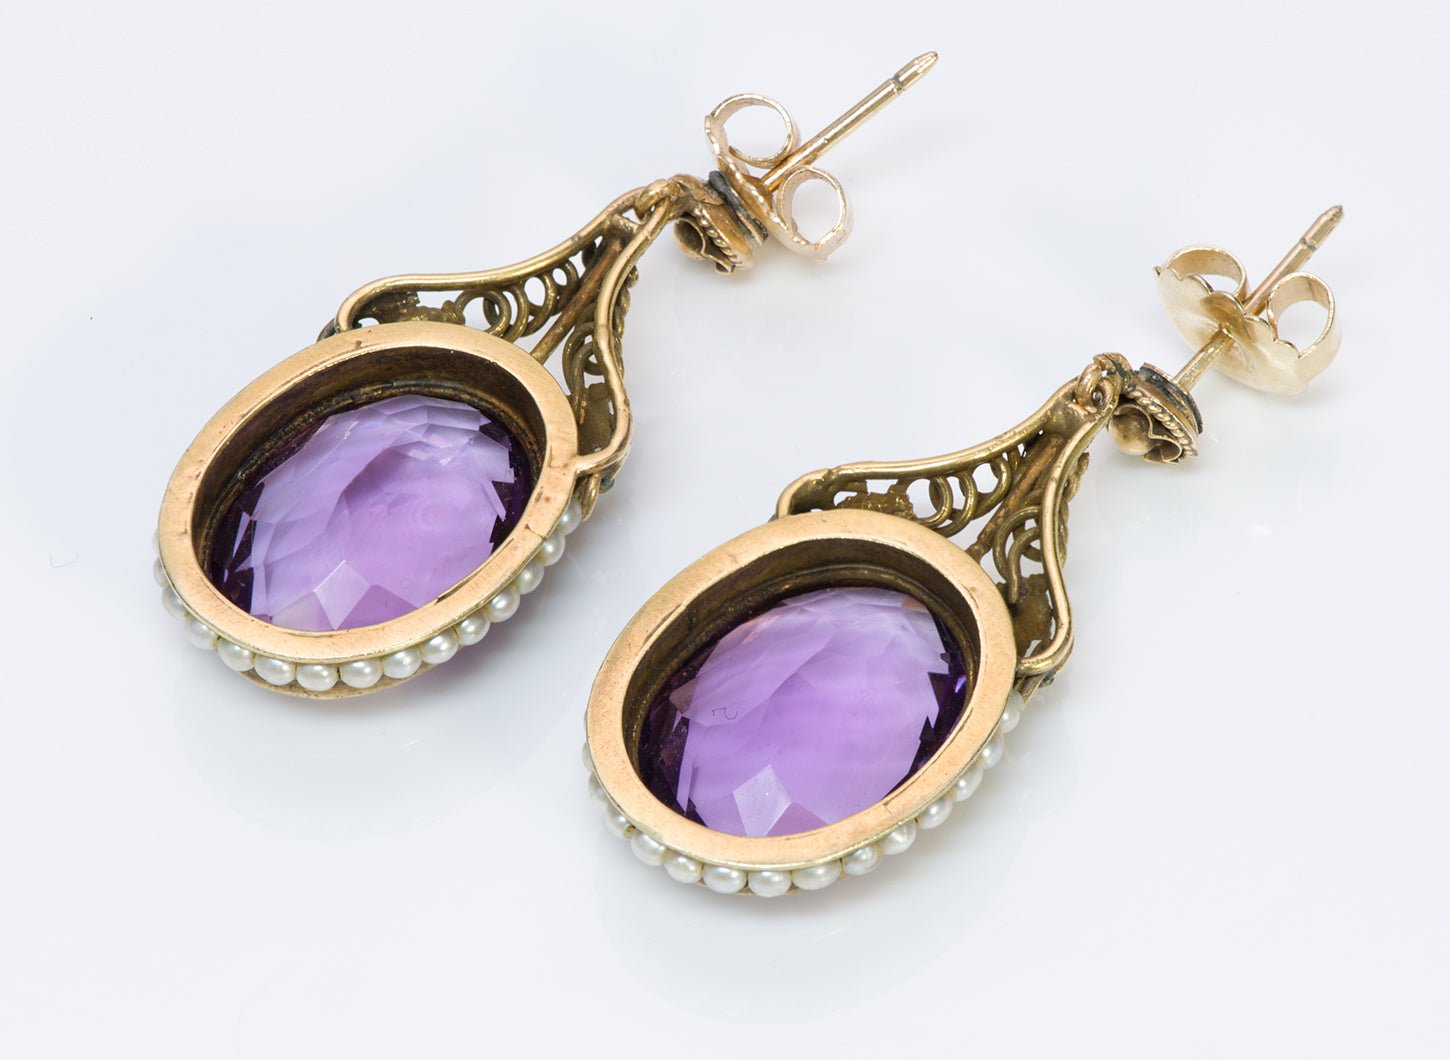 Antique Amethyst Seed Pearl Gold Earrings - DSF Antique Jewelry